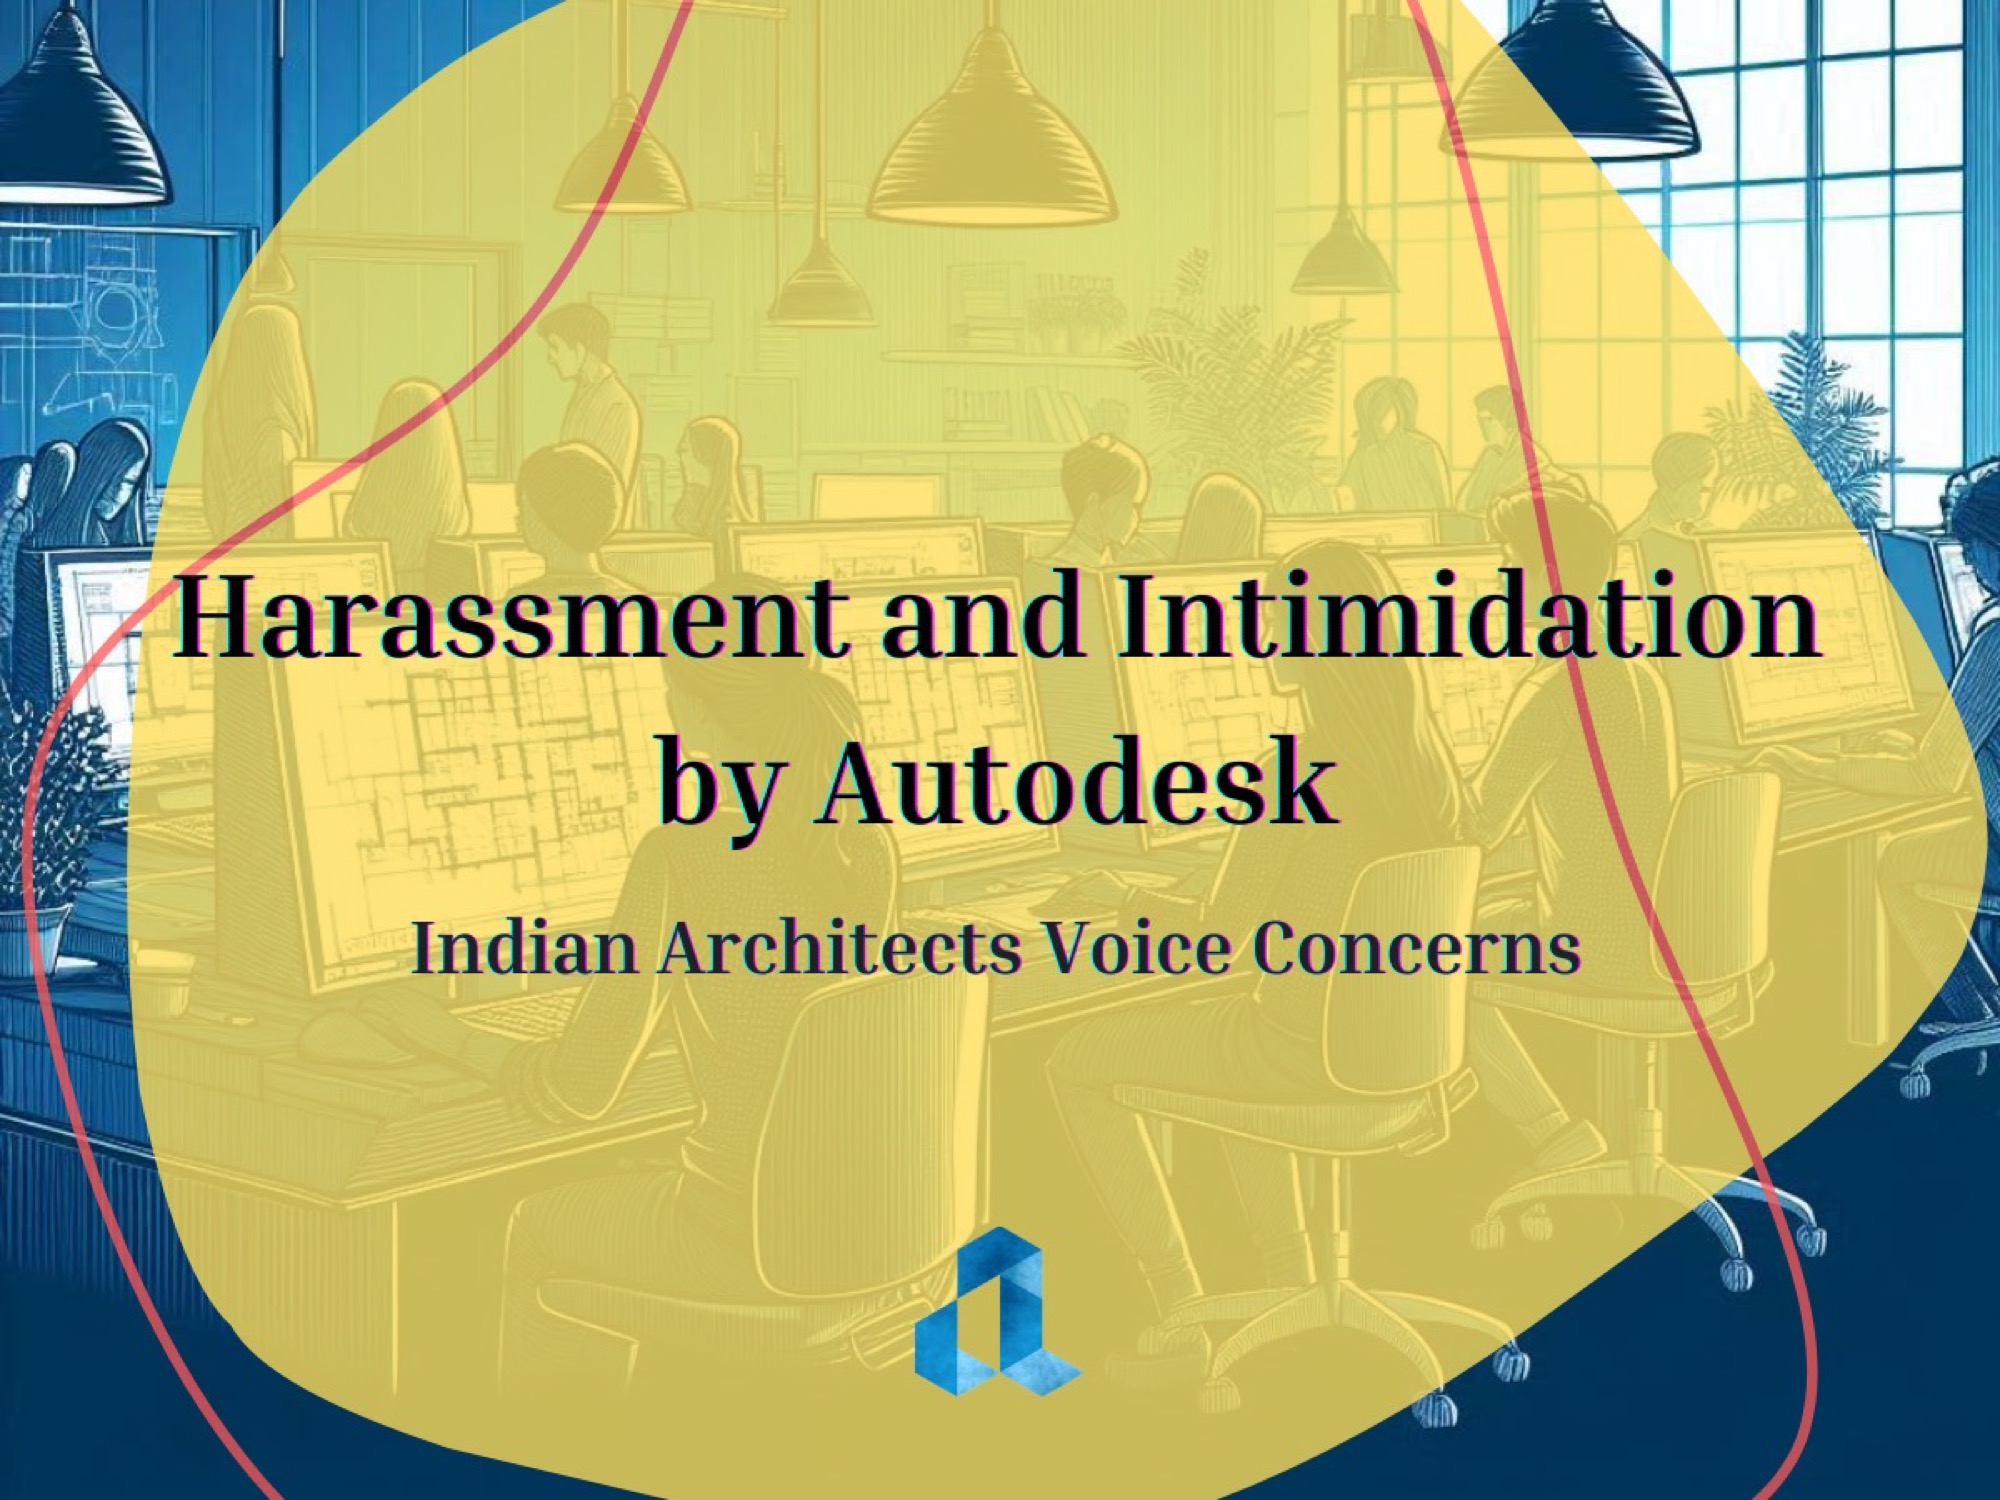 Indian Architects report harassment by Autodesk